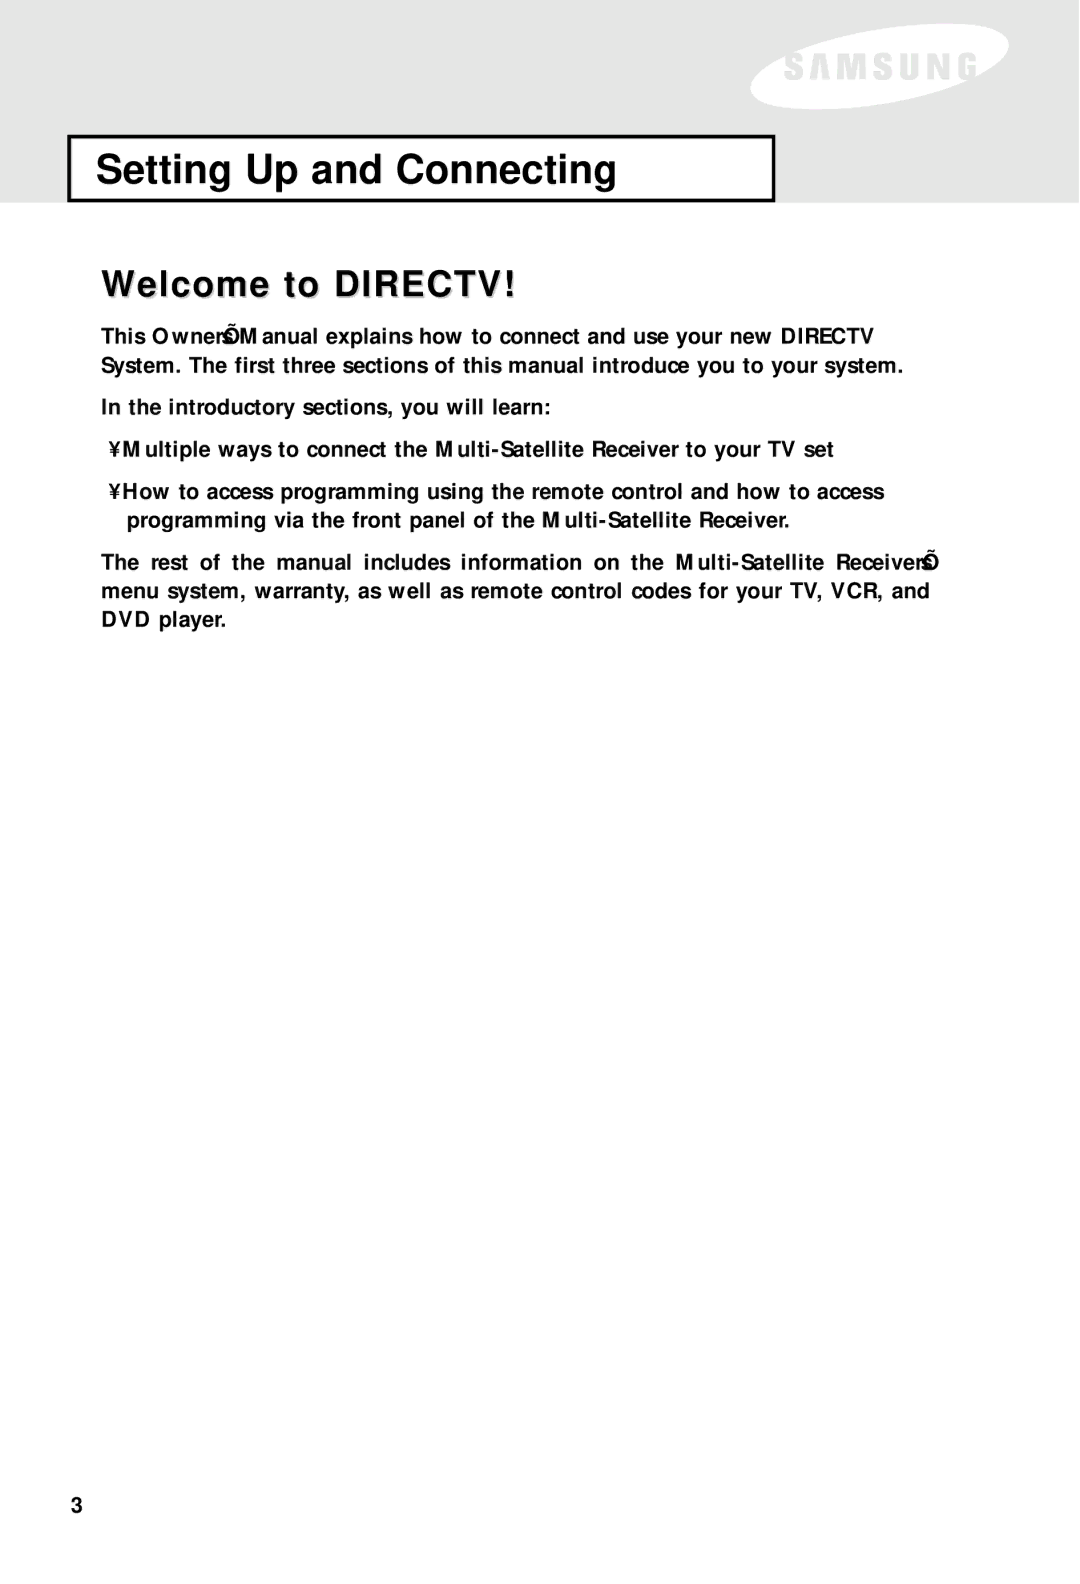 Samsung SIR-S60W owner manual Setting Up and Connecting, Welcome to Directv 